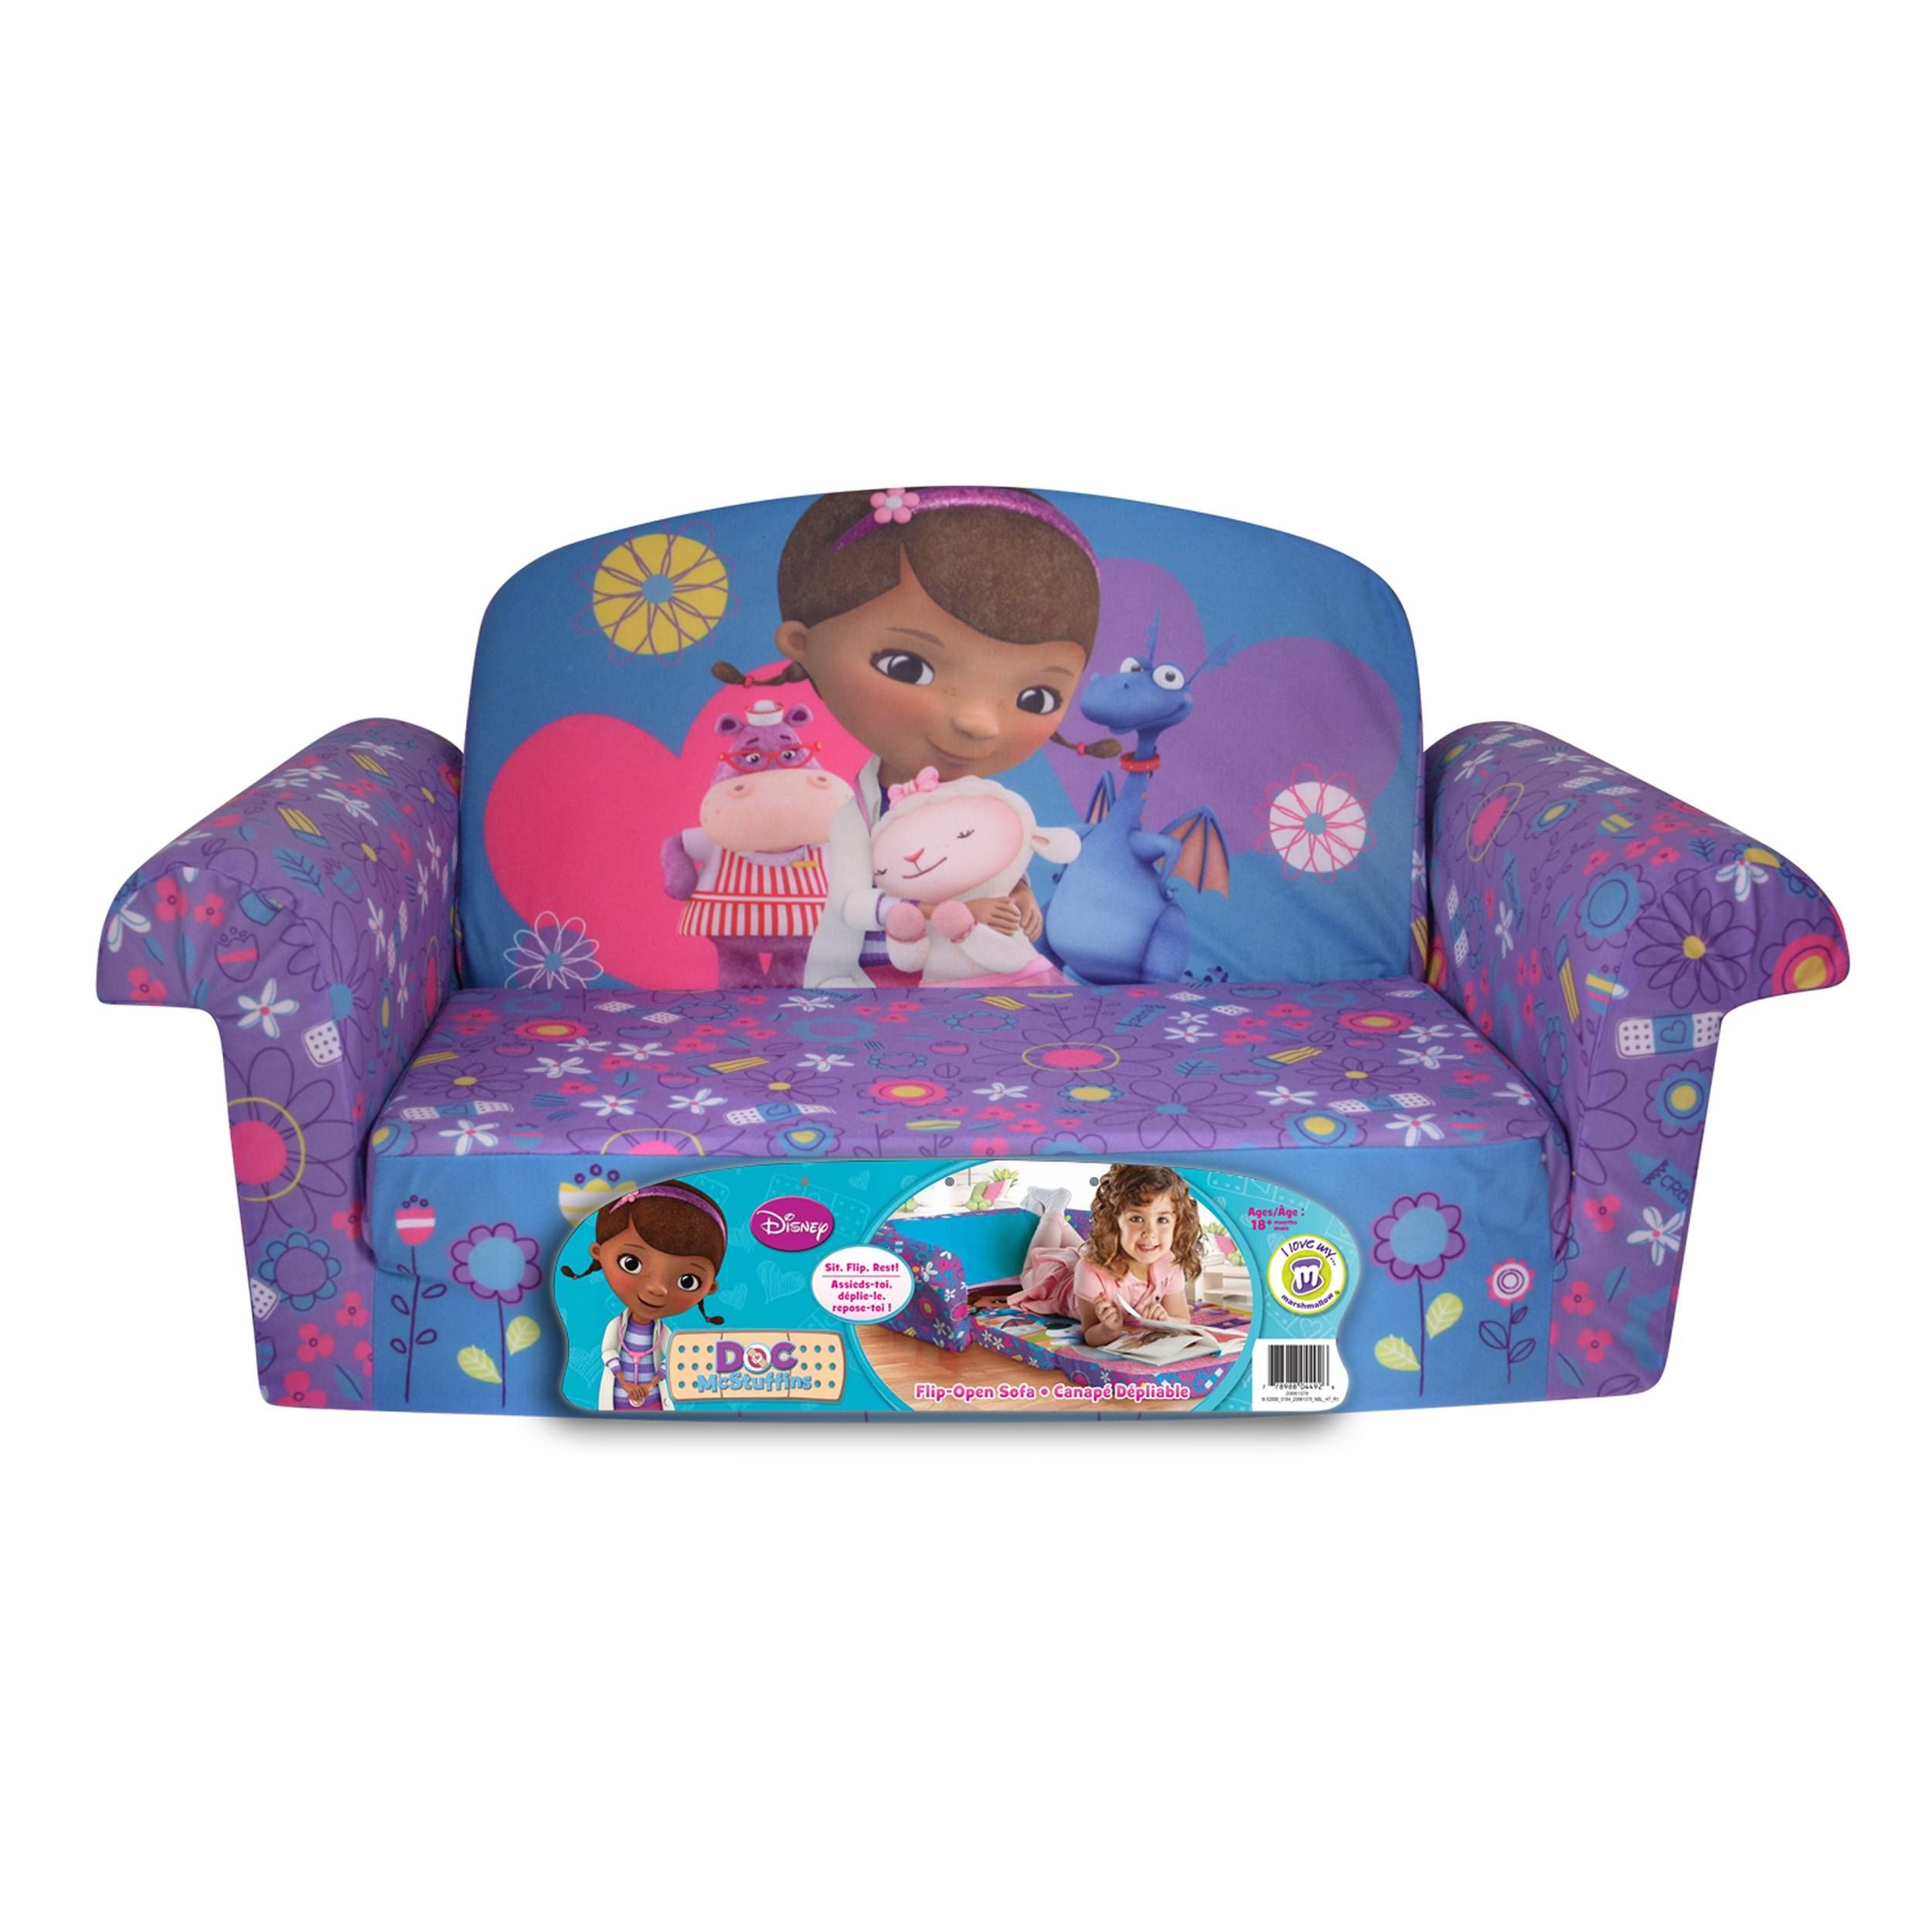 Marshmallow Furniture, Children's 2 In 1 Flip Open Foam Sofa Pertaining To Flip Out Sofa For Kids (View 19 of 30)